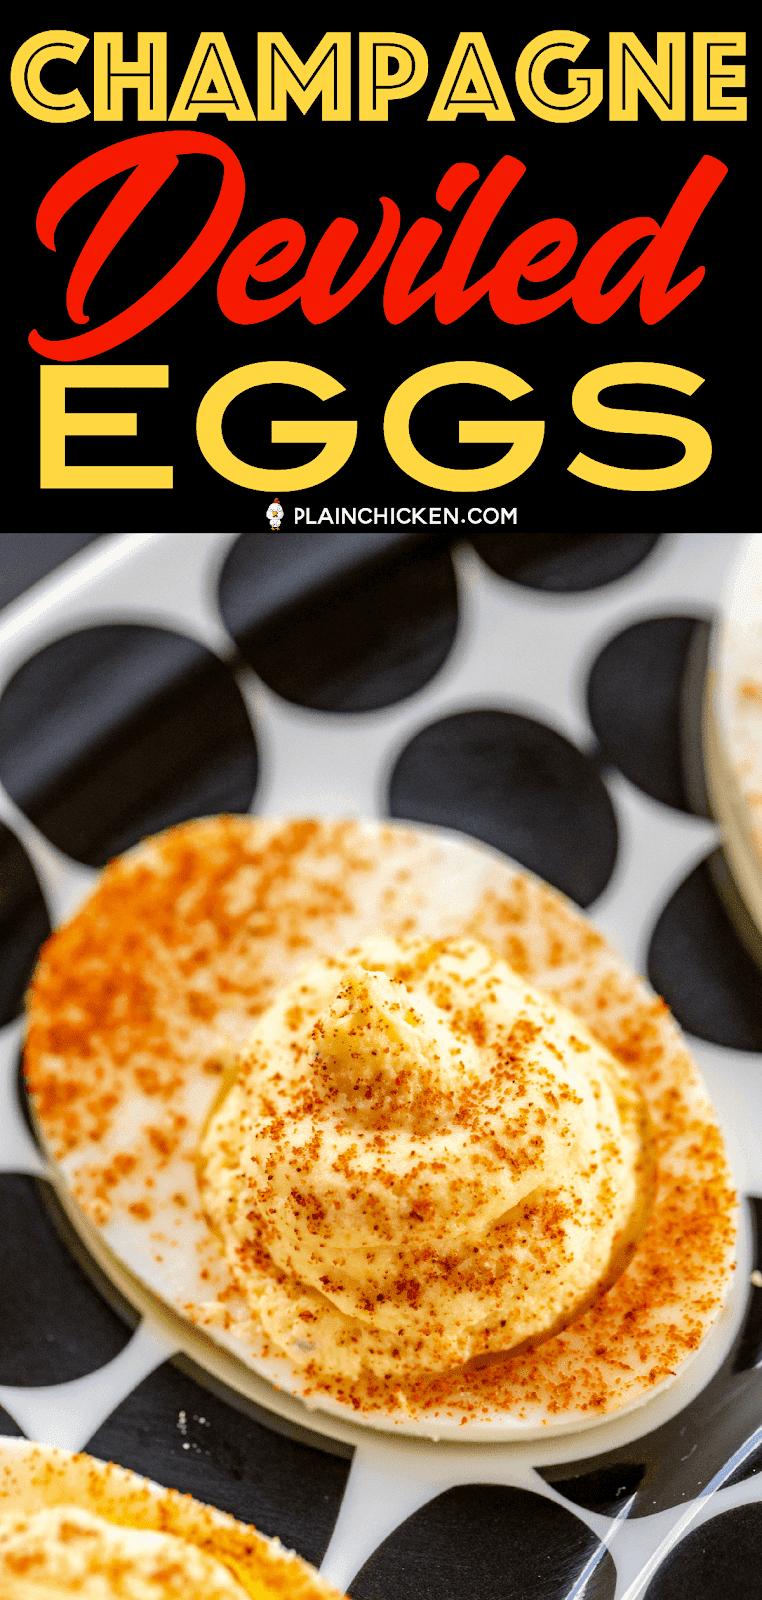 Champagne Deviled Eggs - seriously delicious!! Made these for a party and everyone raved about them!!! Can make ahead of time and refrigerate until ready to serve. Hard boiled eggs, mayonnaise, onion powder, champagne vinegar, salt, pepper, dry mustard. Perfect appetizer for parties and tailgating!! #deviledeggs #newyearsparty #partyfood #champagne